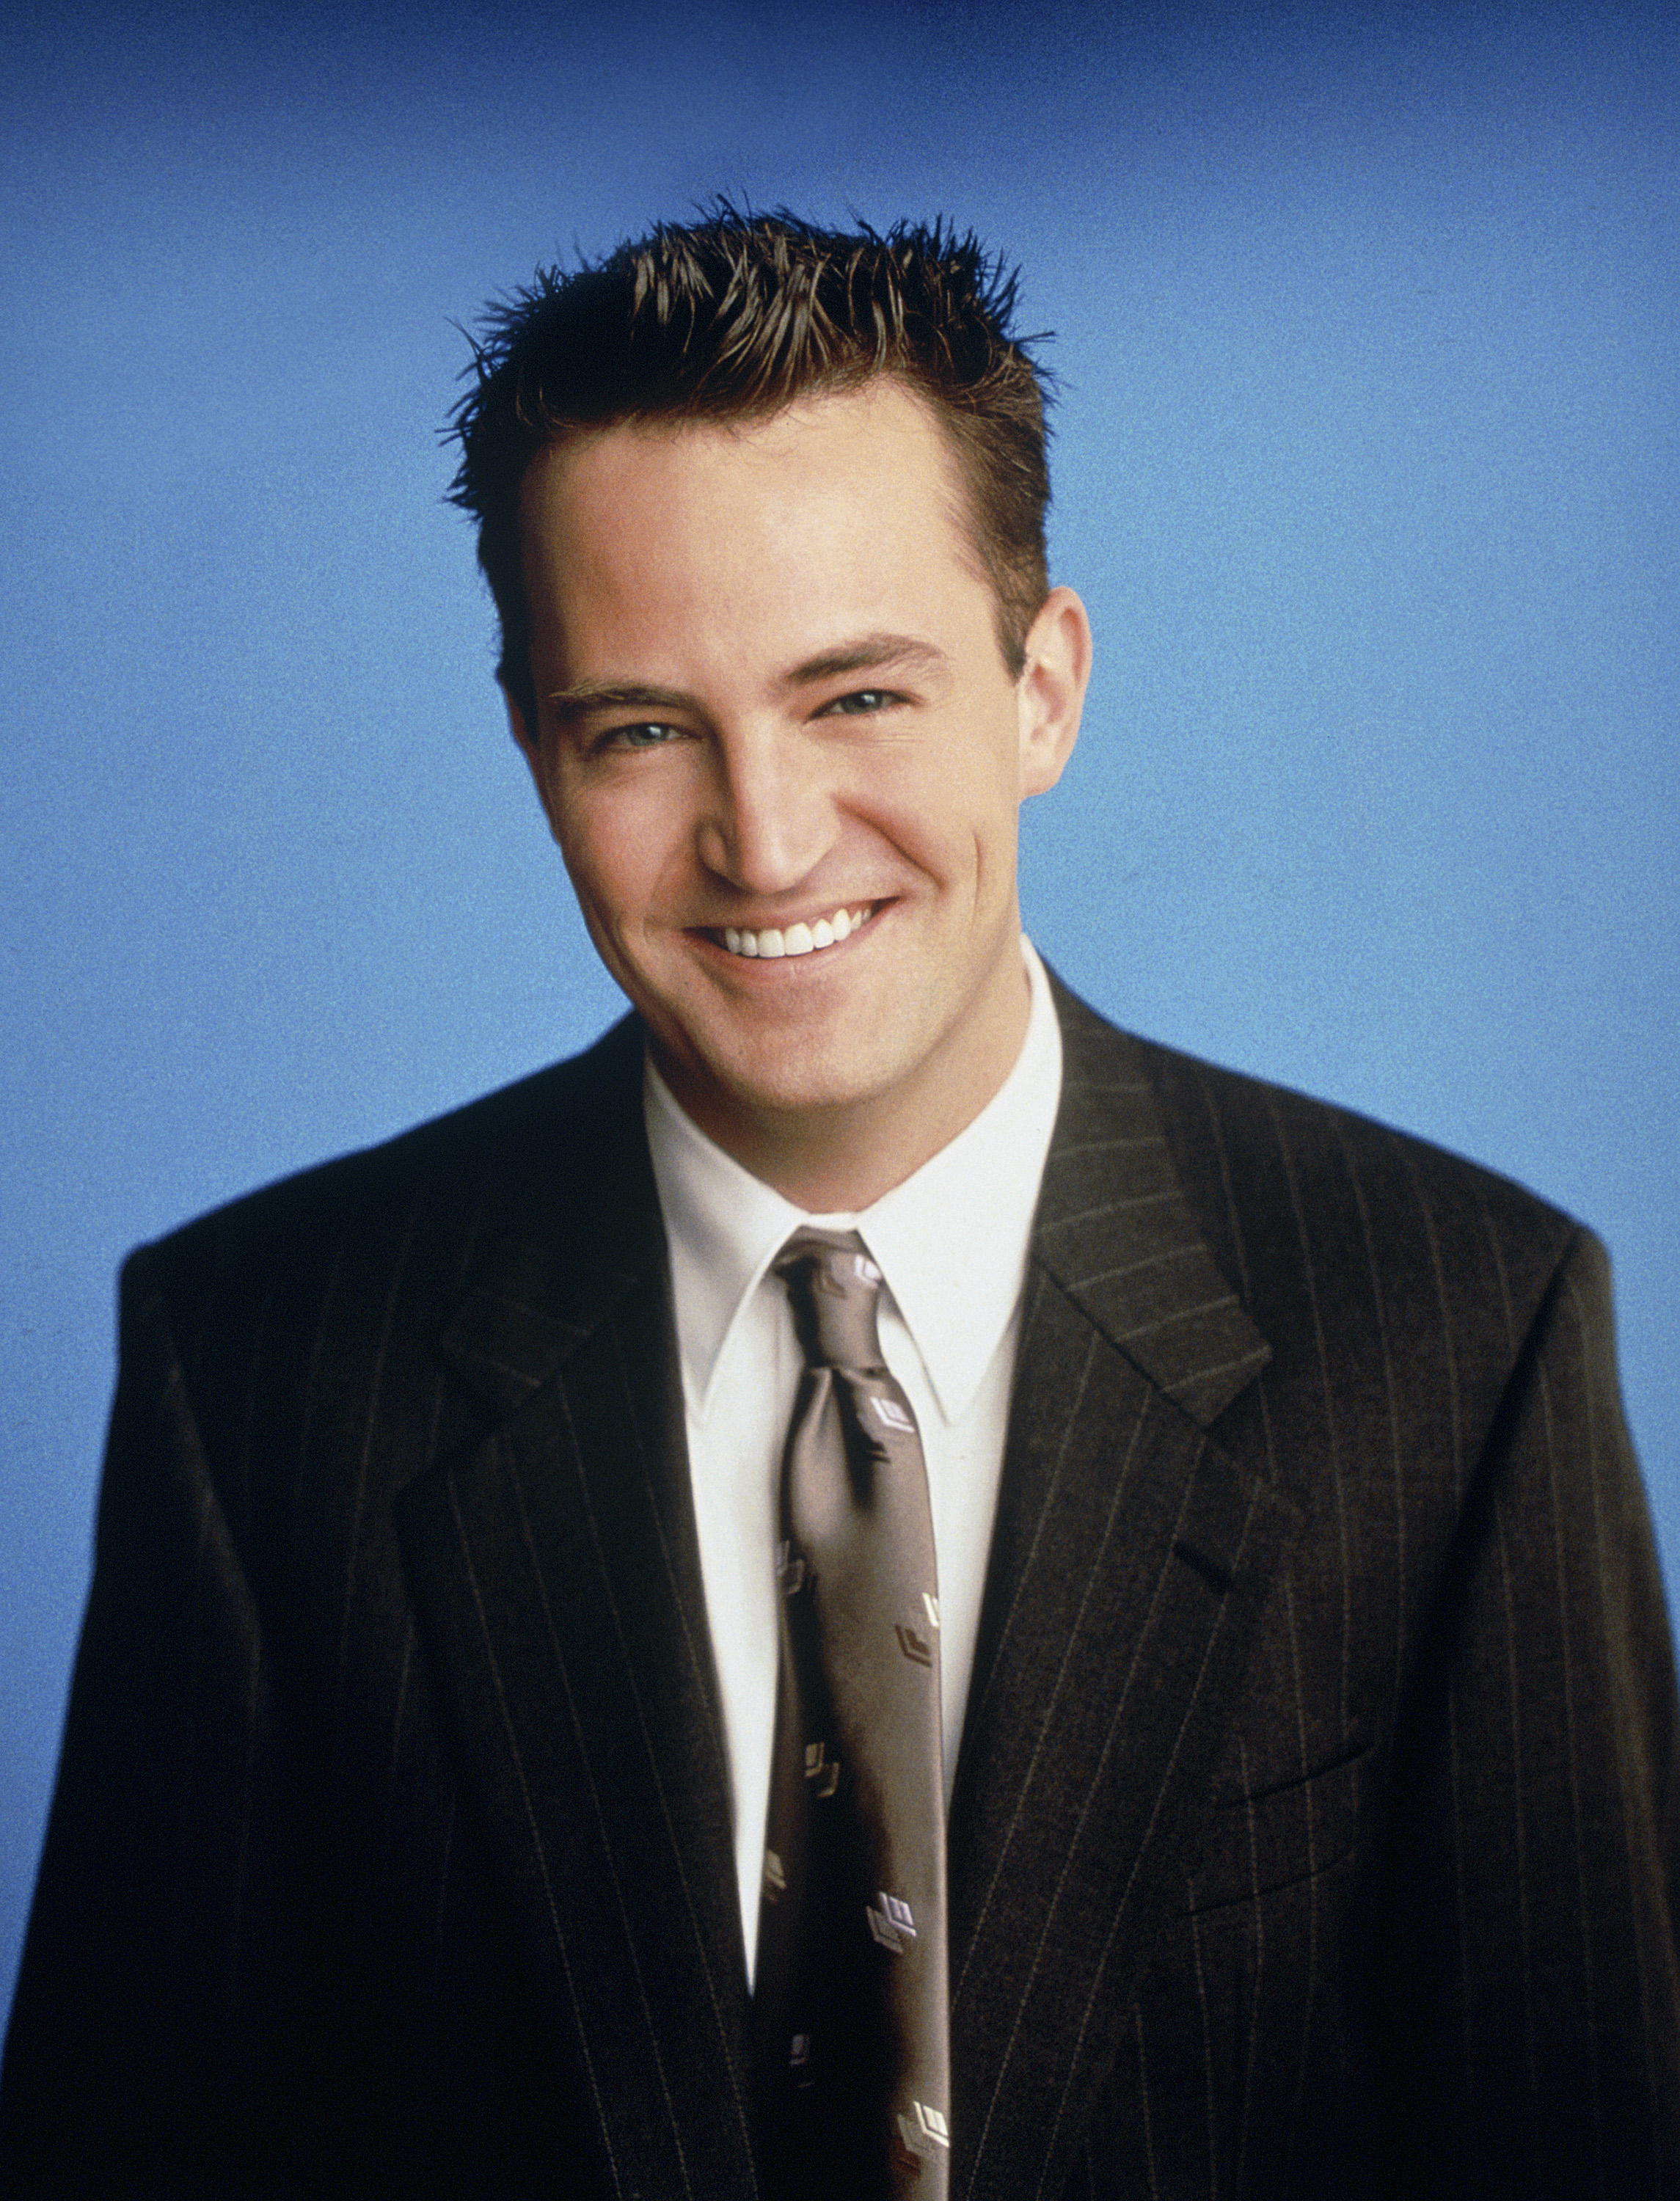 A photo of Matthew Perry as Chandler Bing | Source: Getty Images